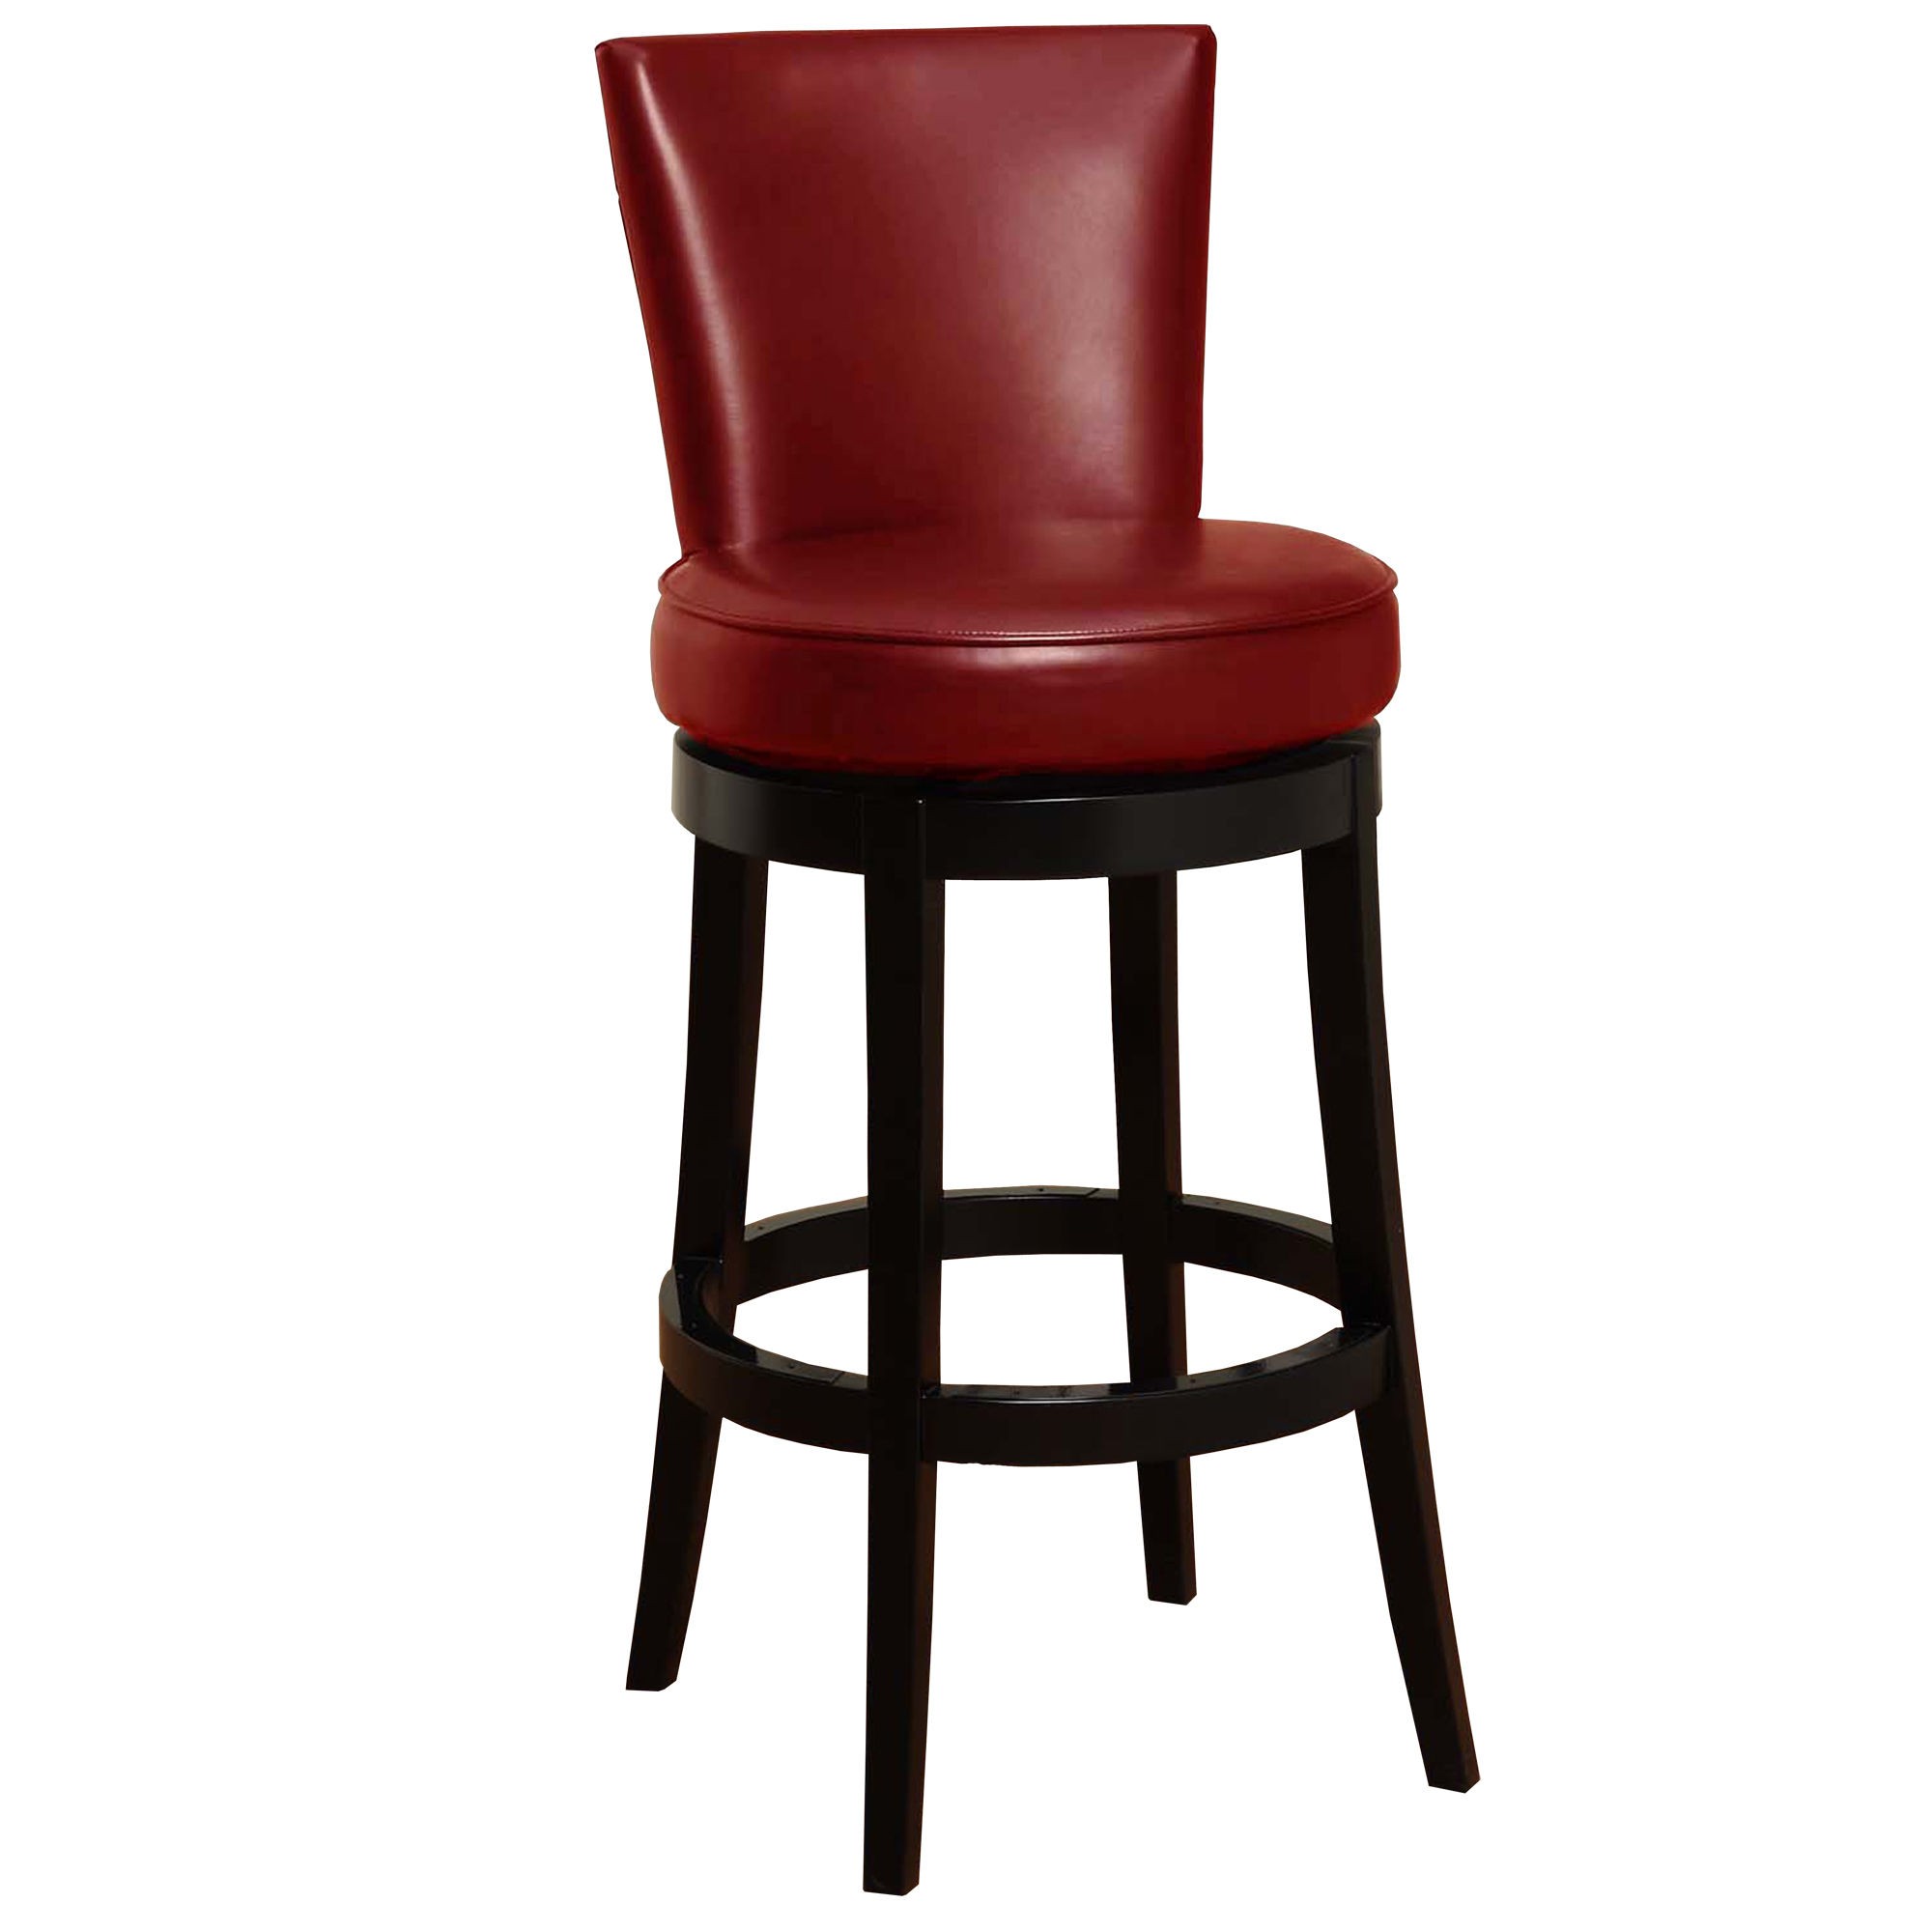 Boston 26 high red leather swivel counter stool 2